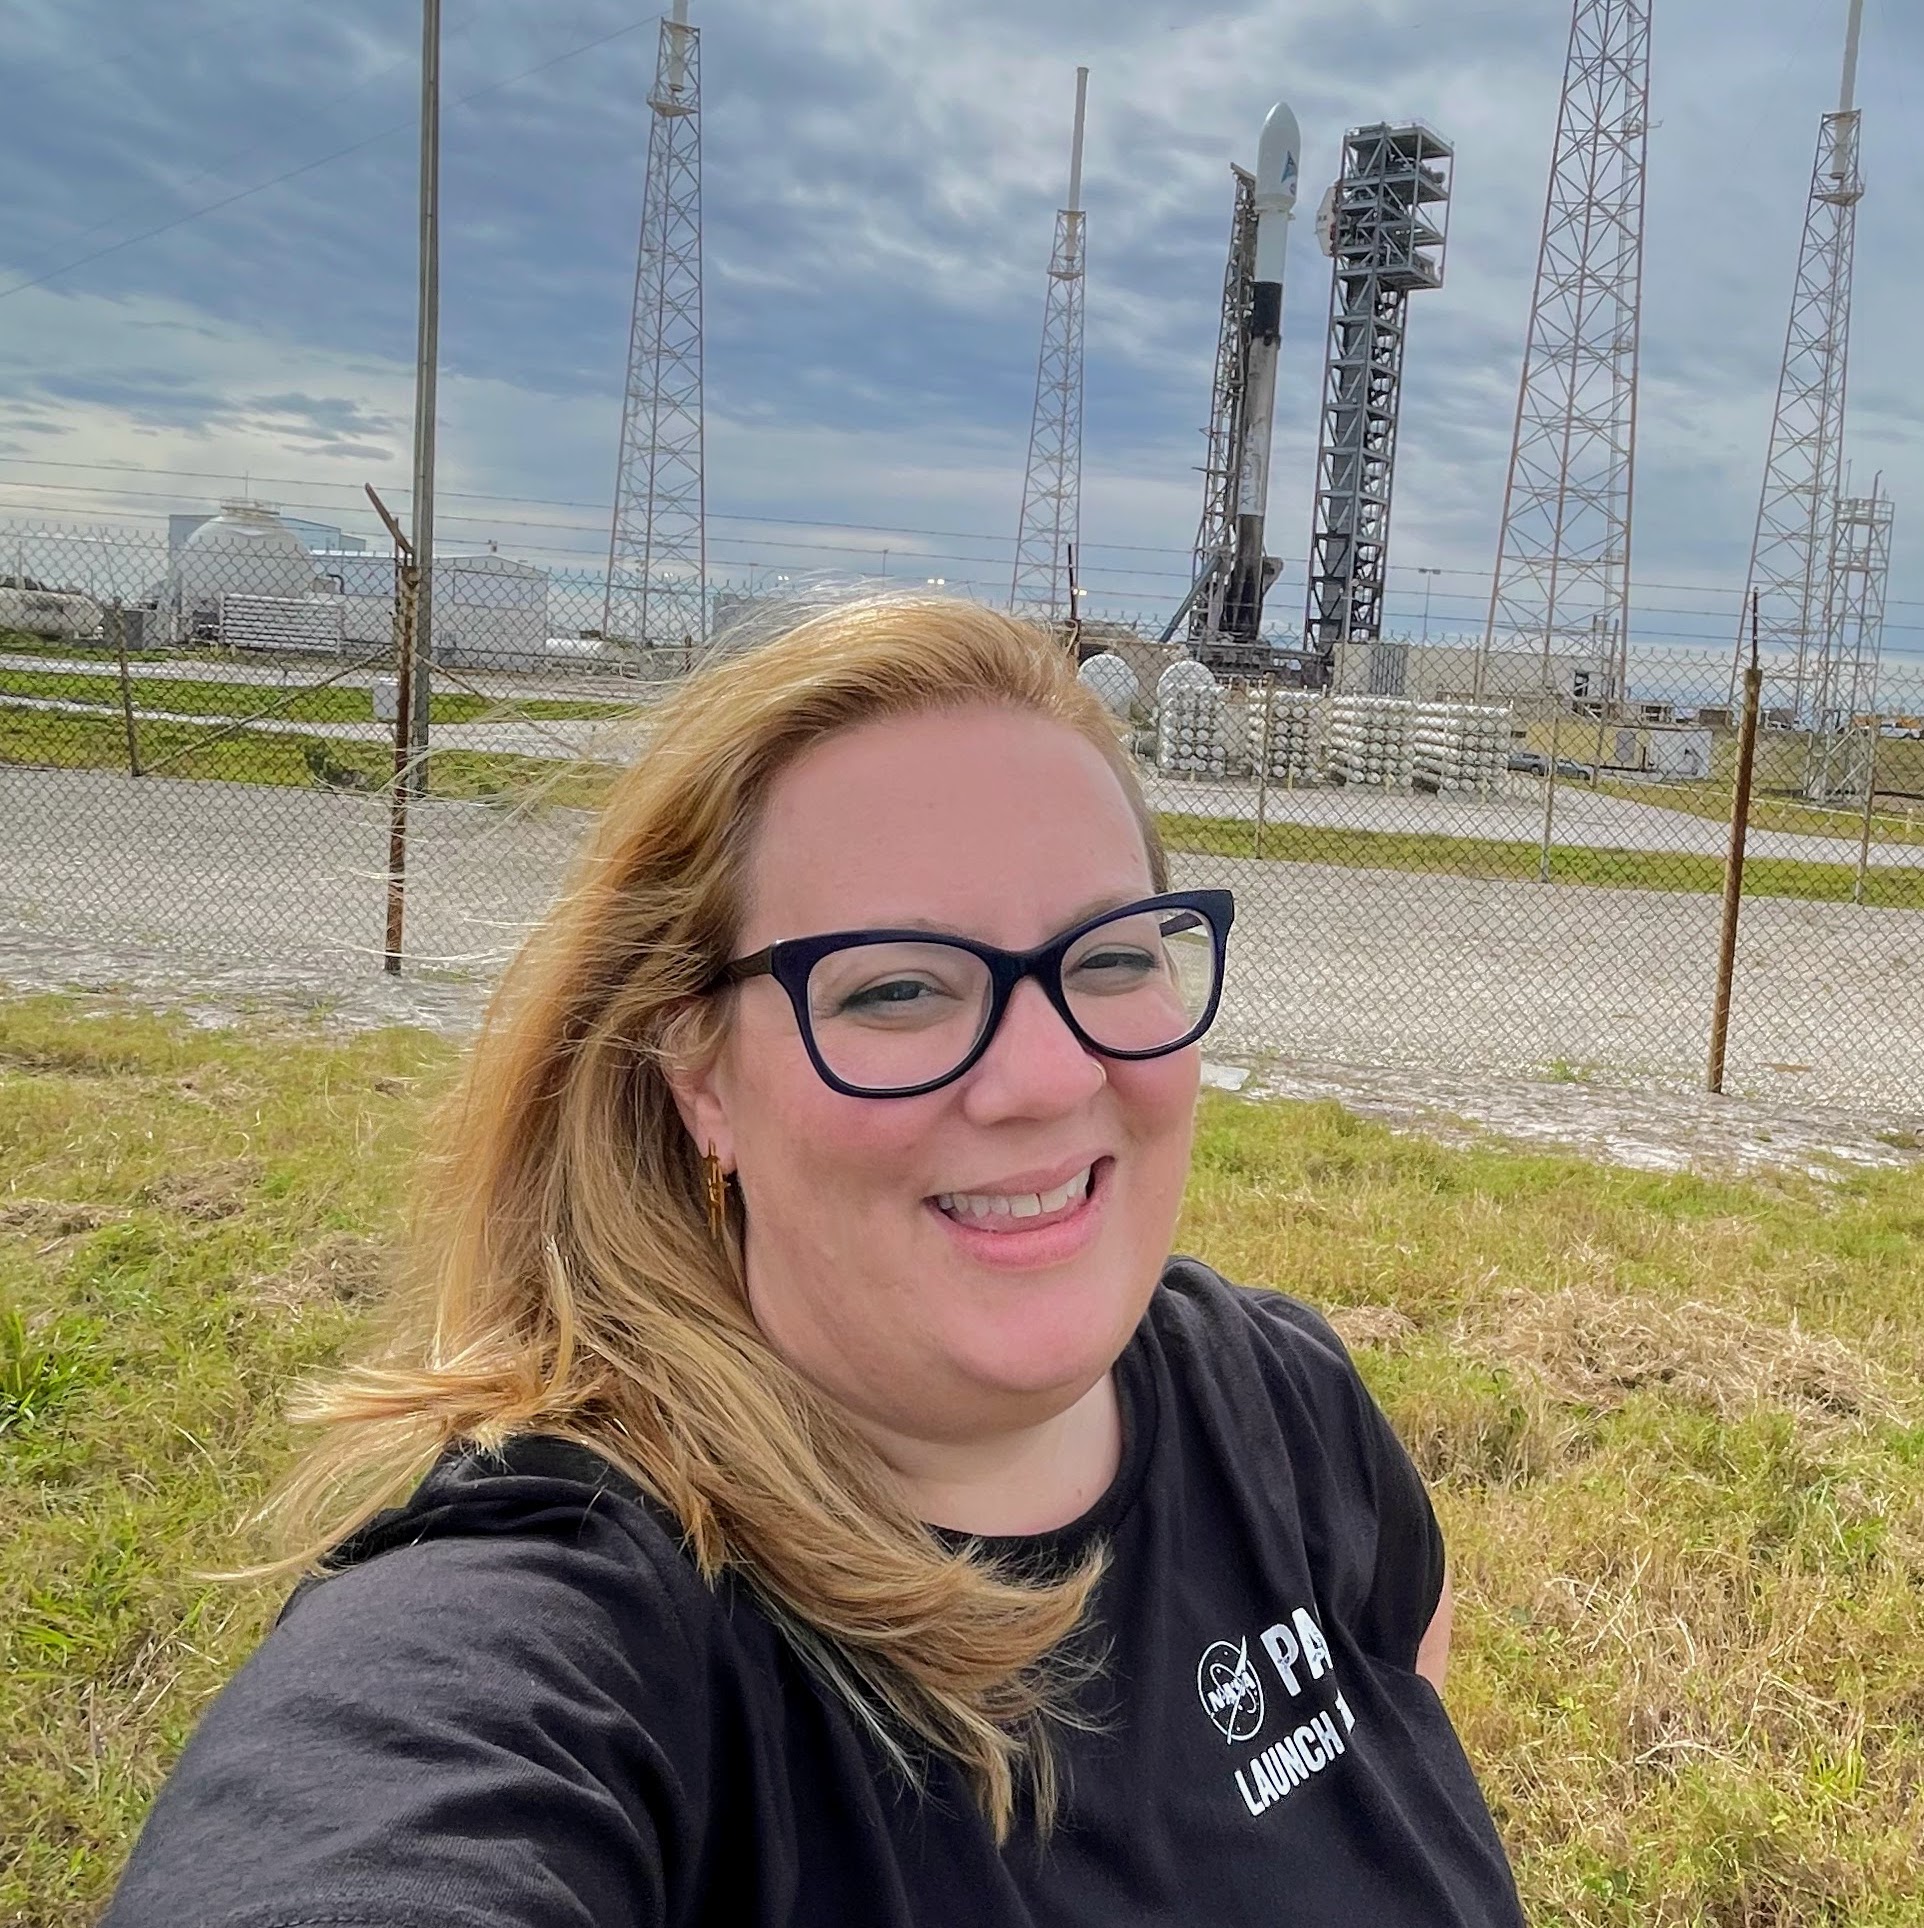 Selfie of Veronica Pinnick standing in front of a green lawn. She is smiling at the camera and wearing black glasses and a black shirt. Behind her, a Falcon 9 rocket is vertical on the launchpad.